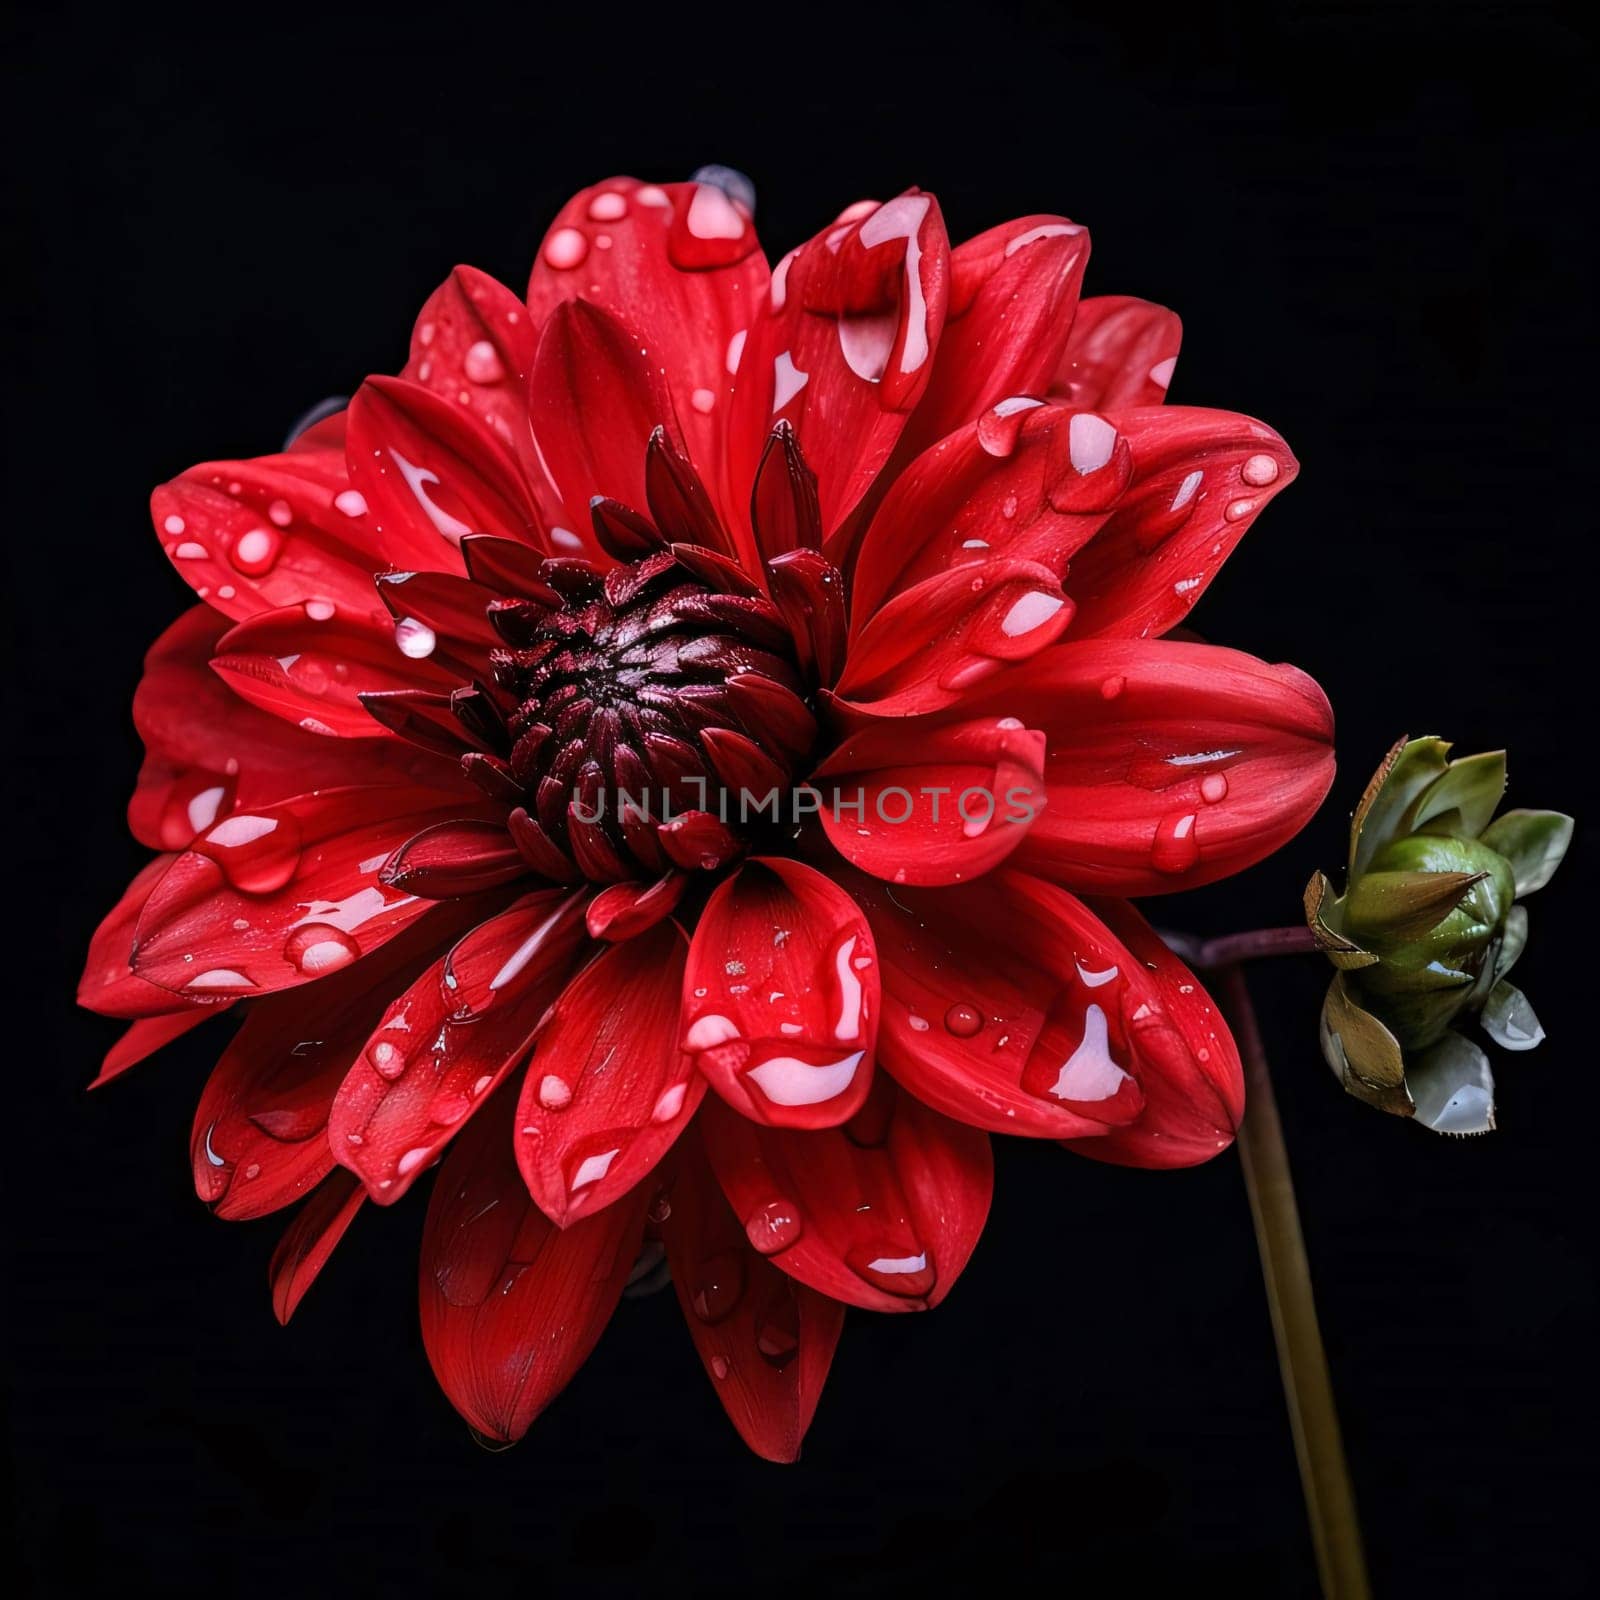 Red dahlia flower with water drops isolated on black background. Flowering flowers, a symbol of spring, new life. A joyful time of nature waking up to life.